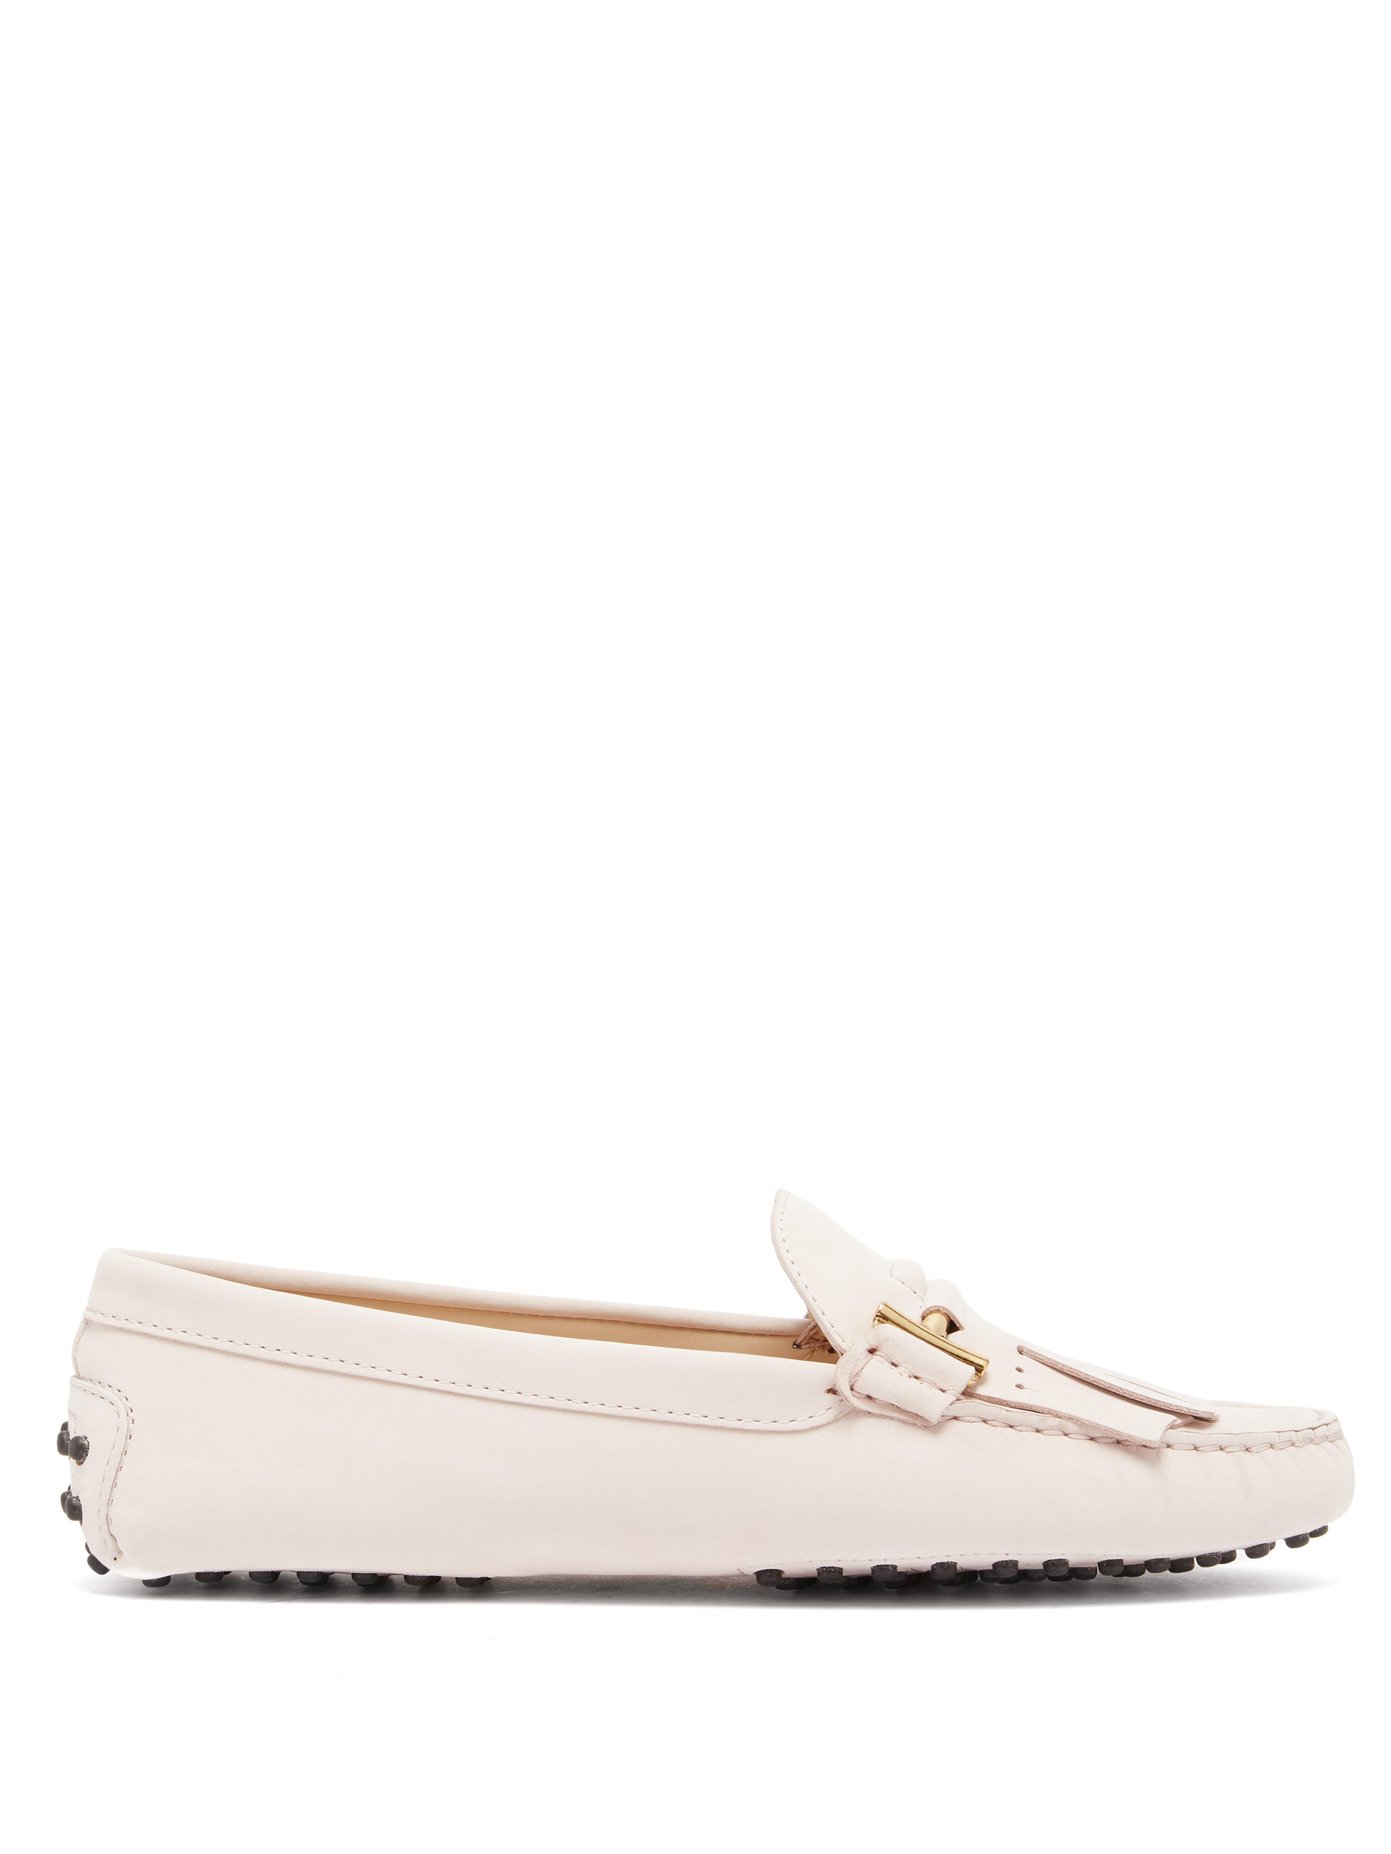 jp tods womens loafers